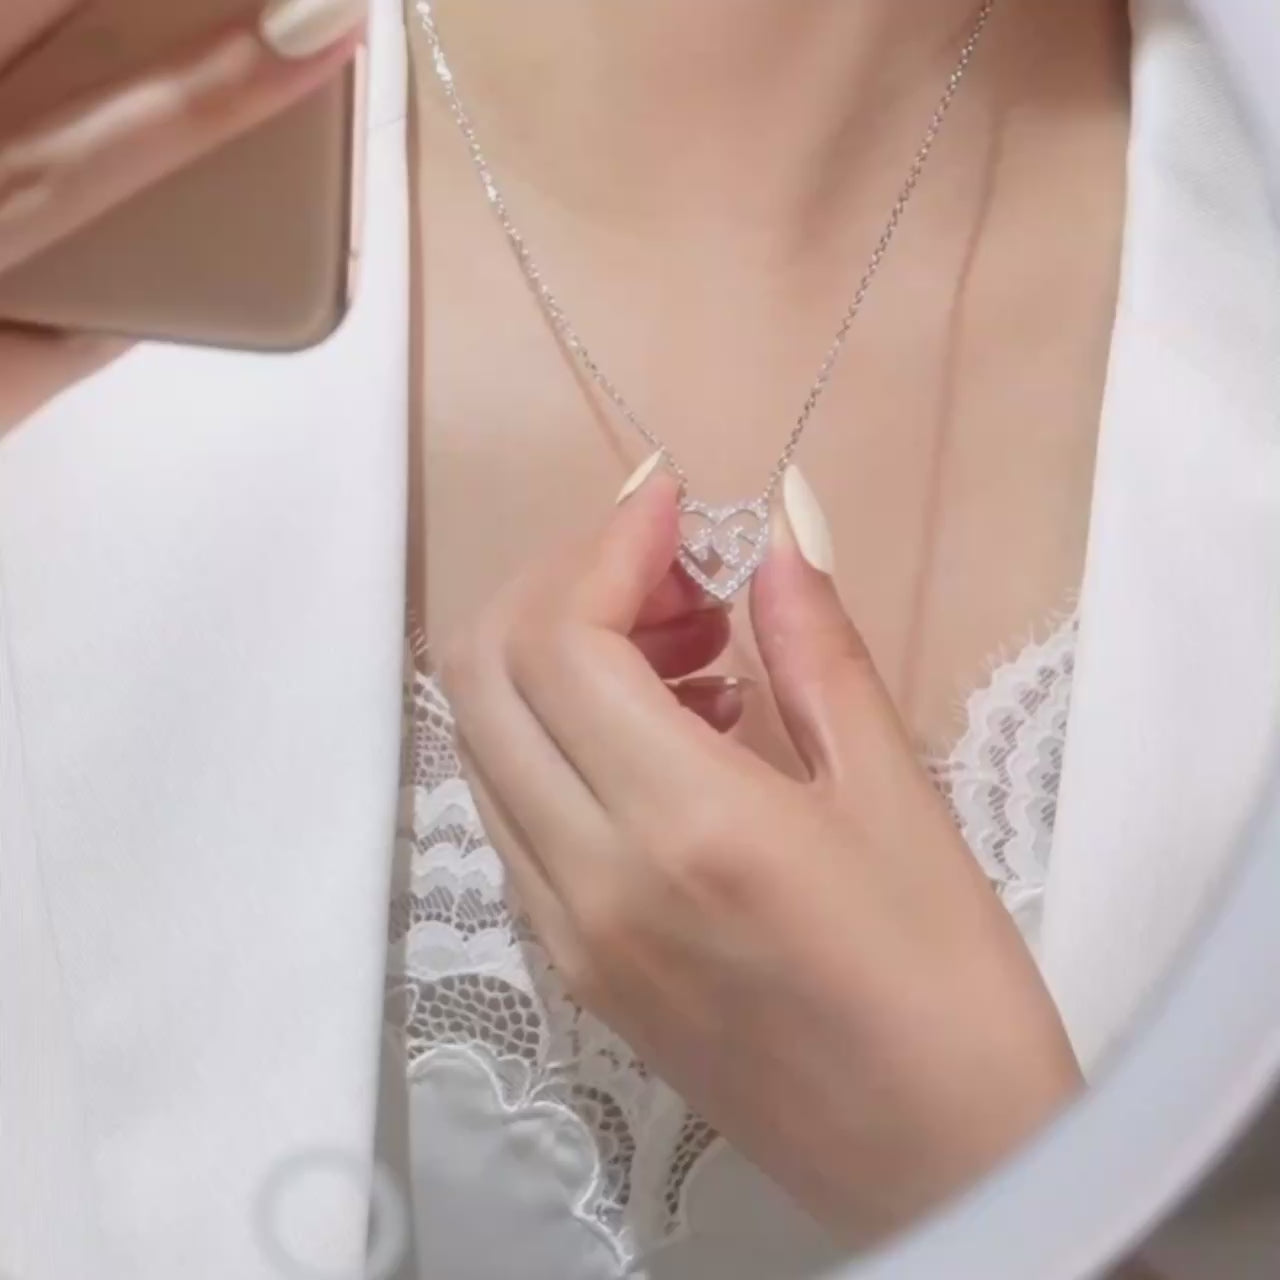 FANCIME "Amuse Me" Sterling Silver Paved CZ Stone Open Heart Necklace Video